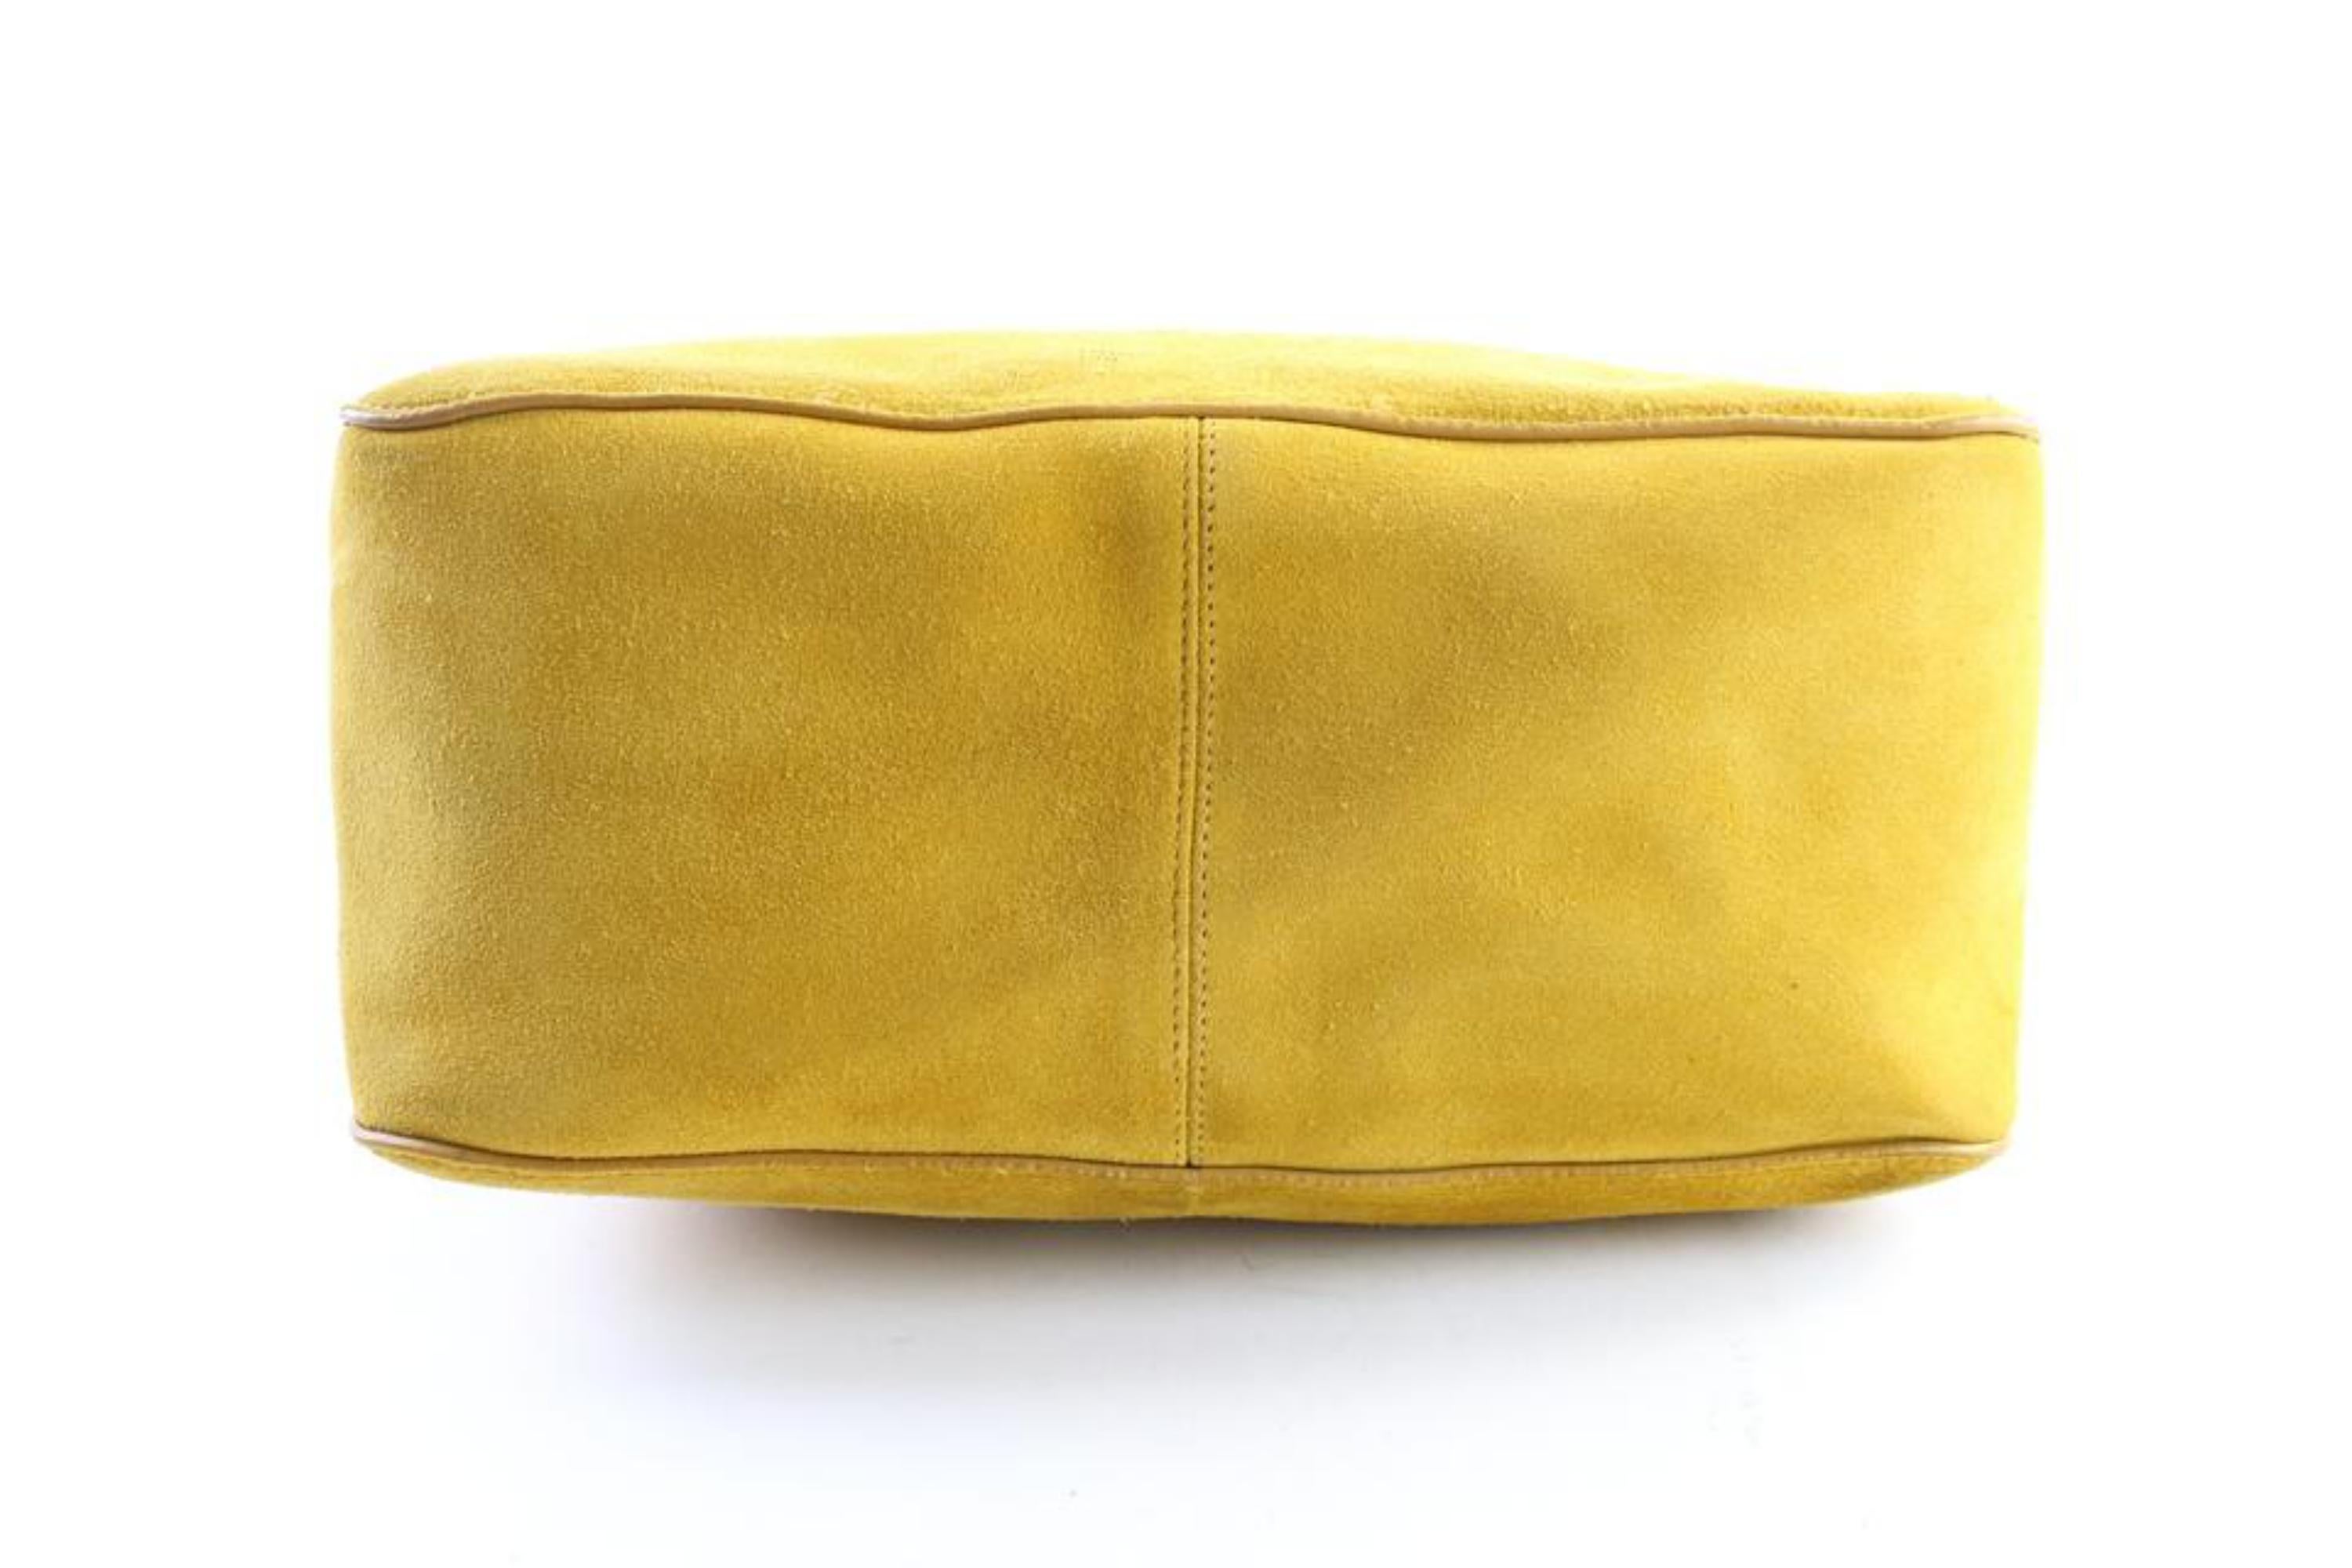 Céline Gourmette Hobo Chain 9cer0613 Mustard Yellow Suede Shoulder Bag For Sale 4